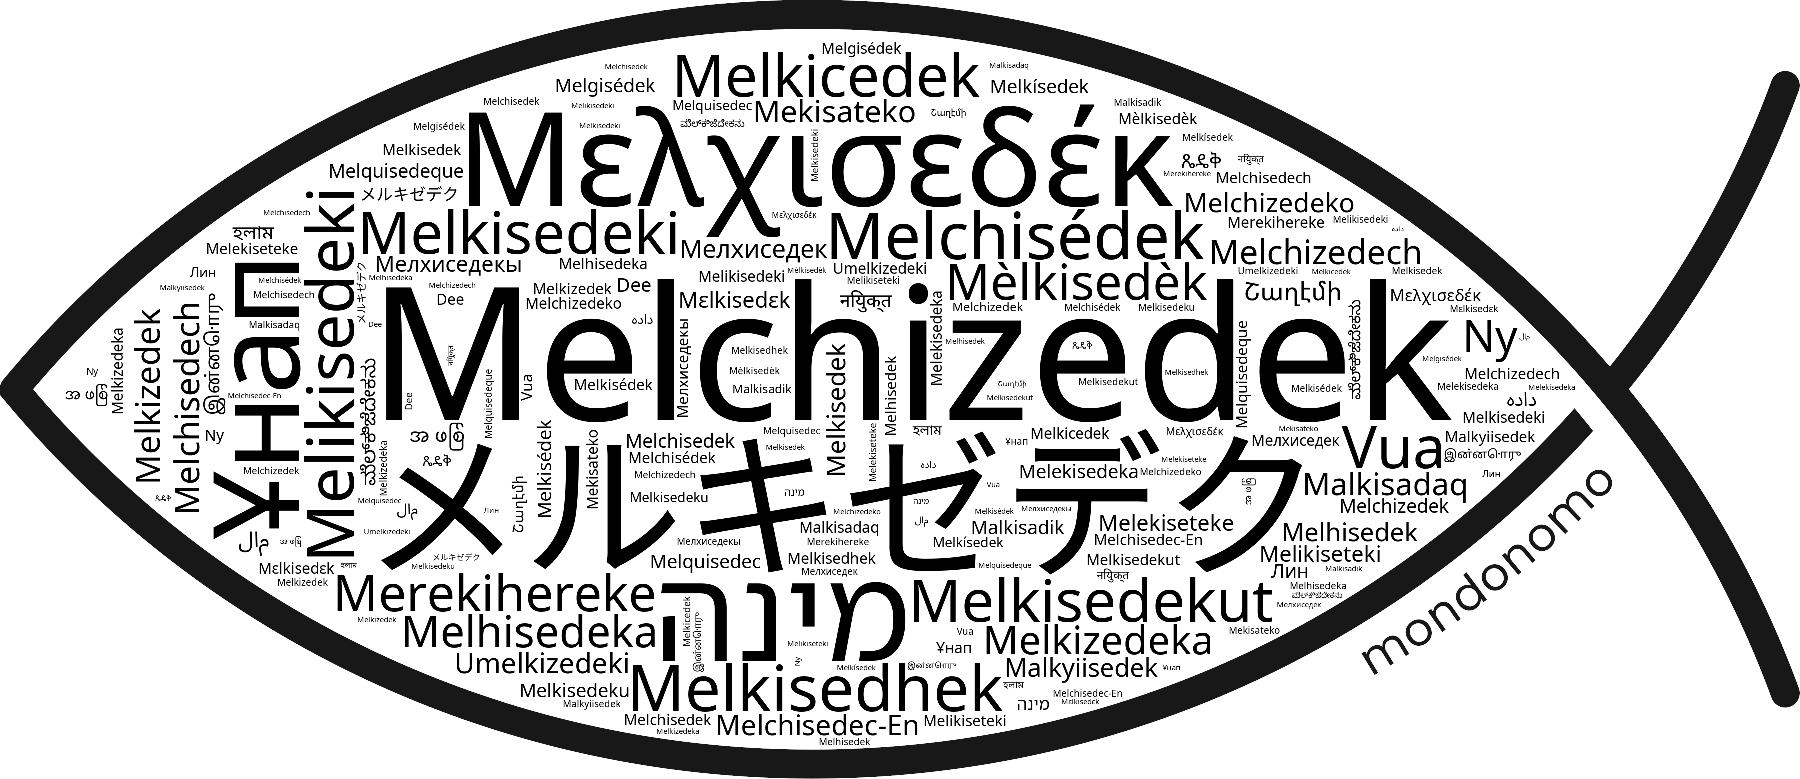 Name Melchizedek in the world's Bibles